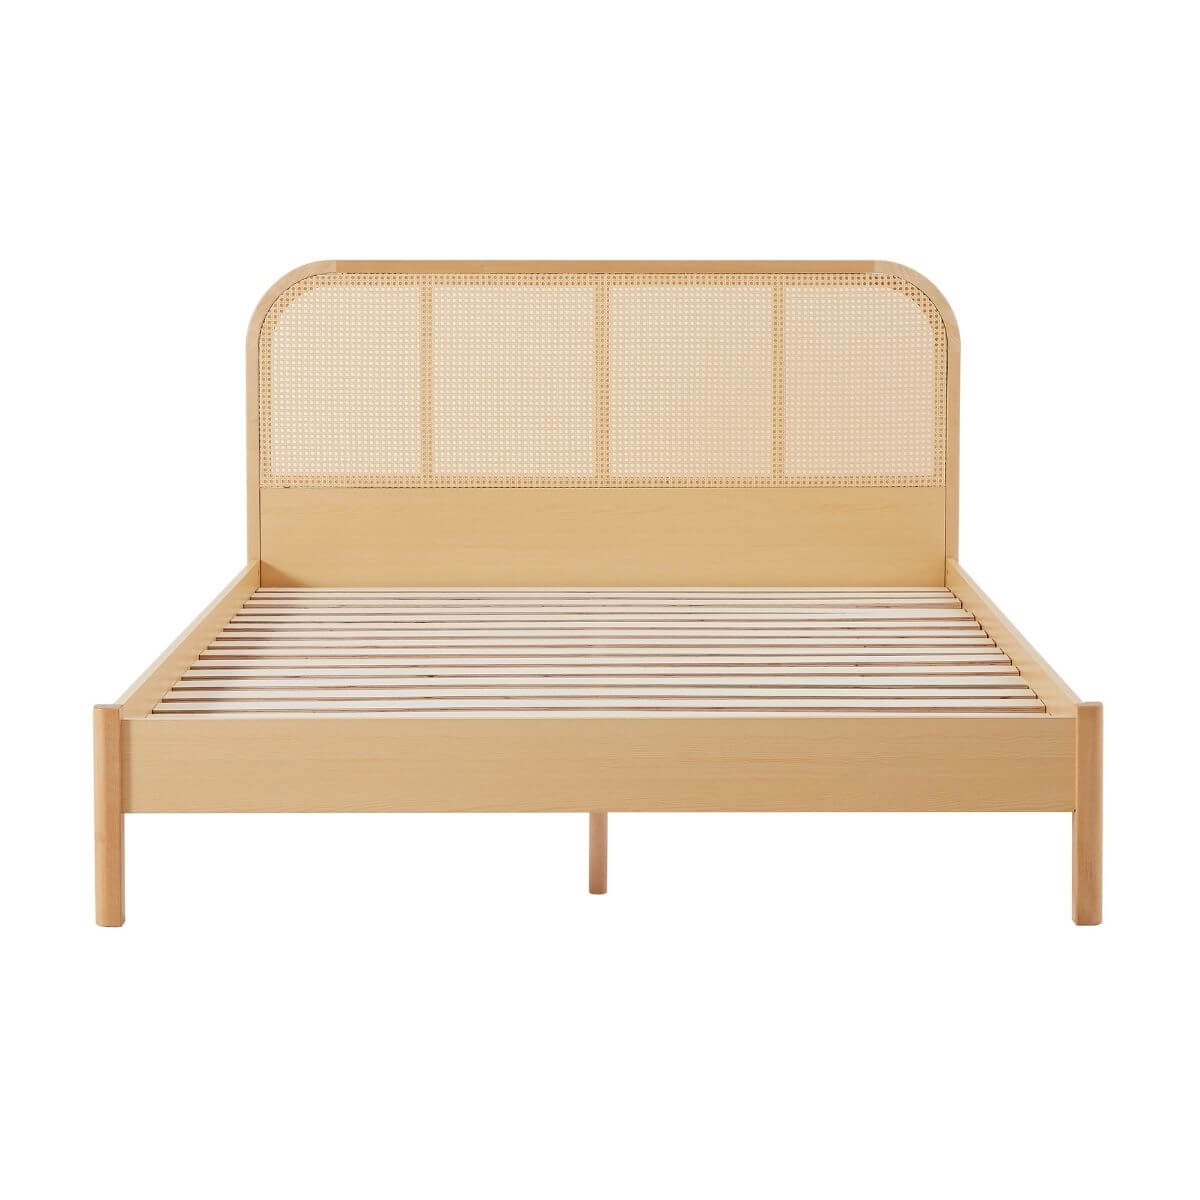 Lulu Bed Frame with Curved Rattan Bedhead - Queen-Upinteriors